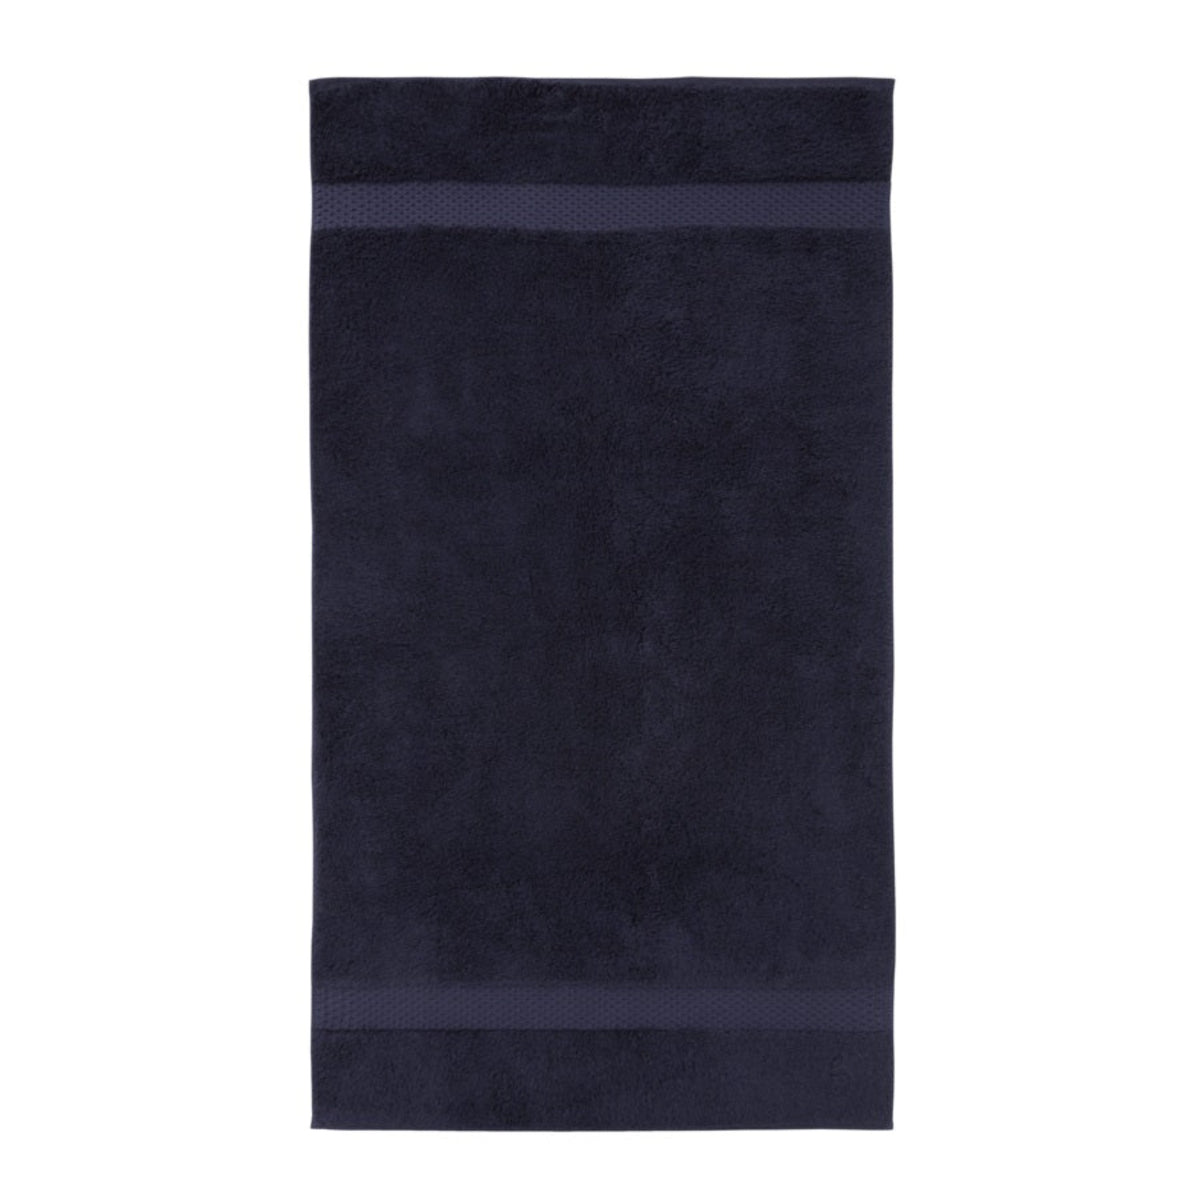 Guest Towel of Yves Delorme Etoile Bath Collection in Marine Color